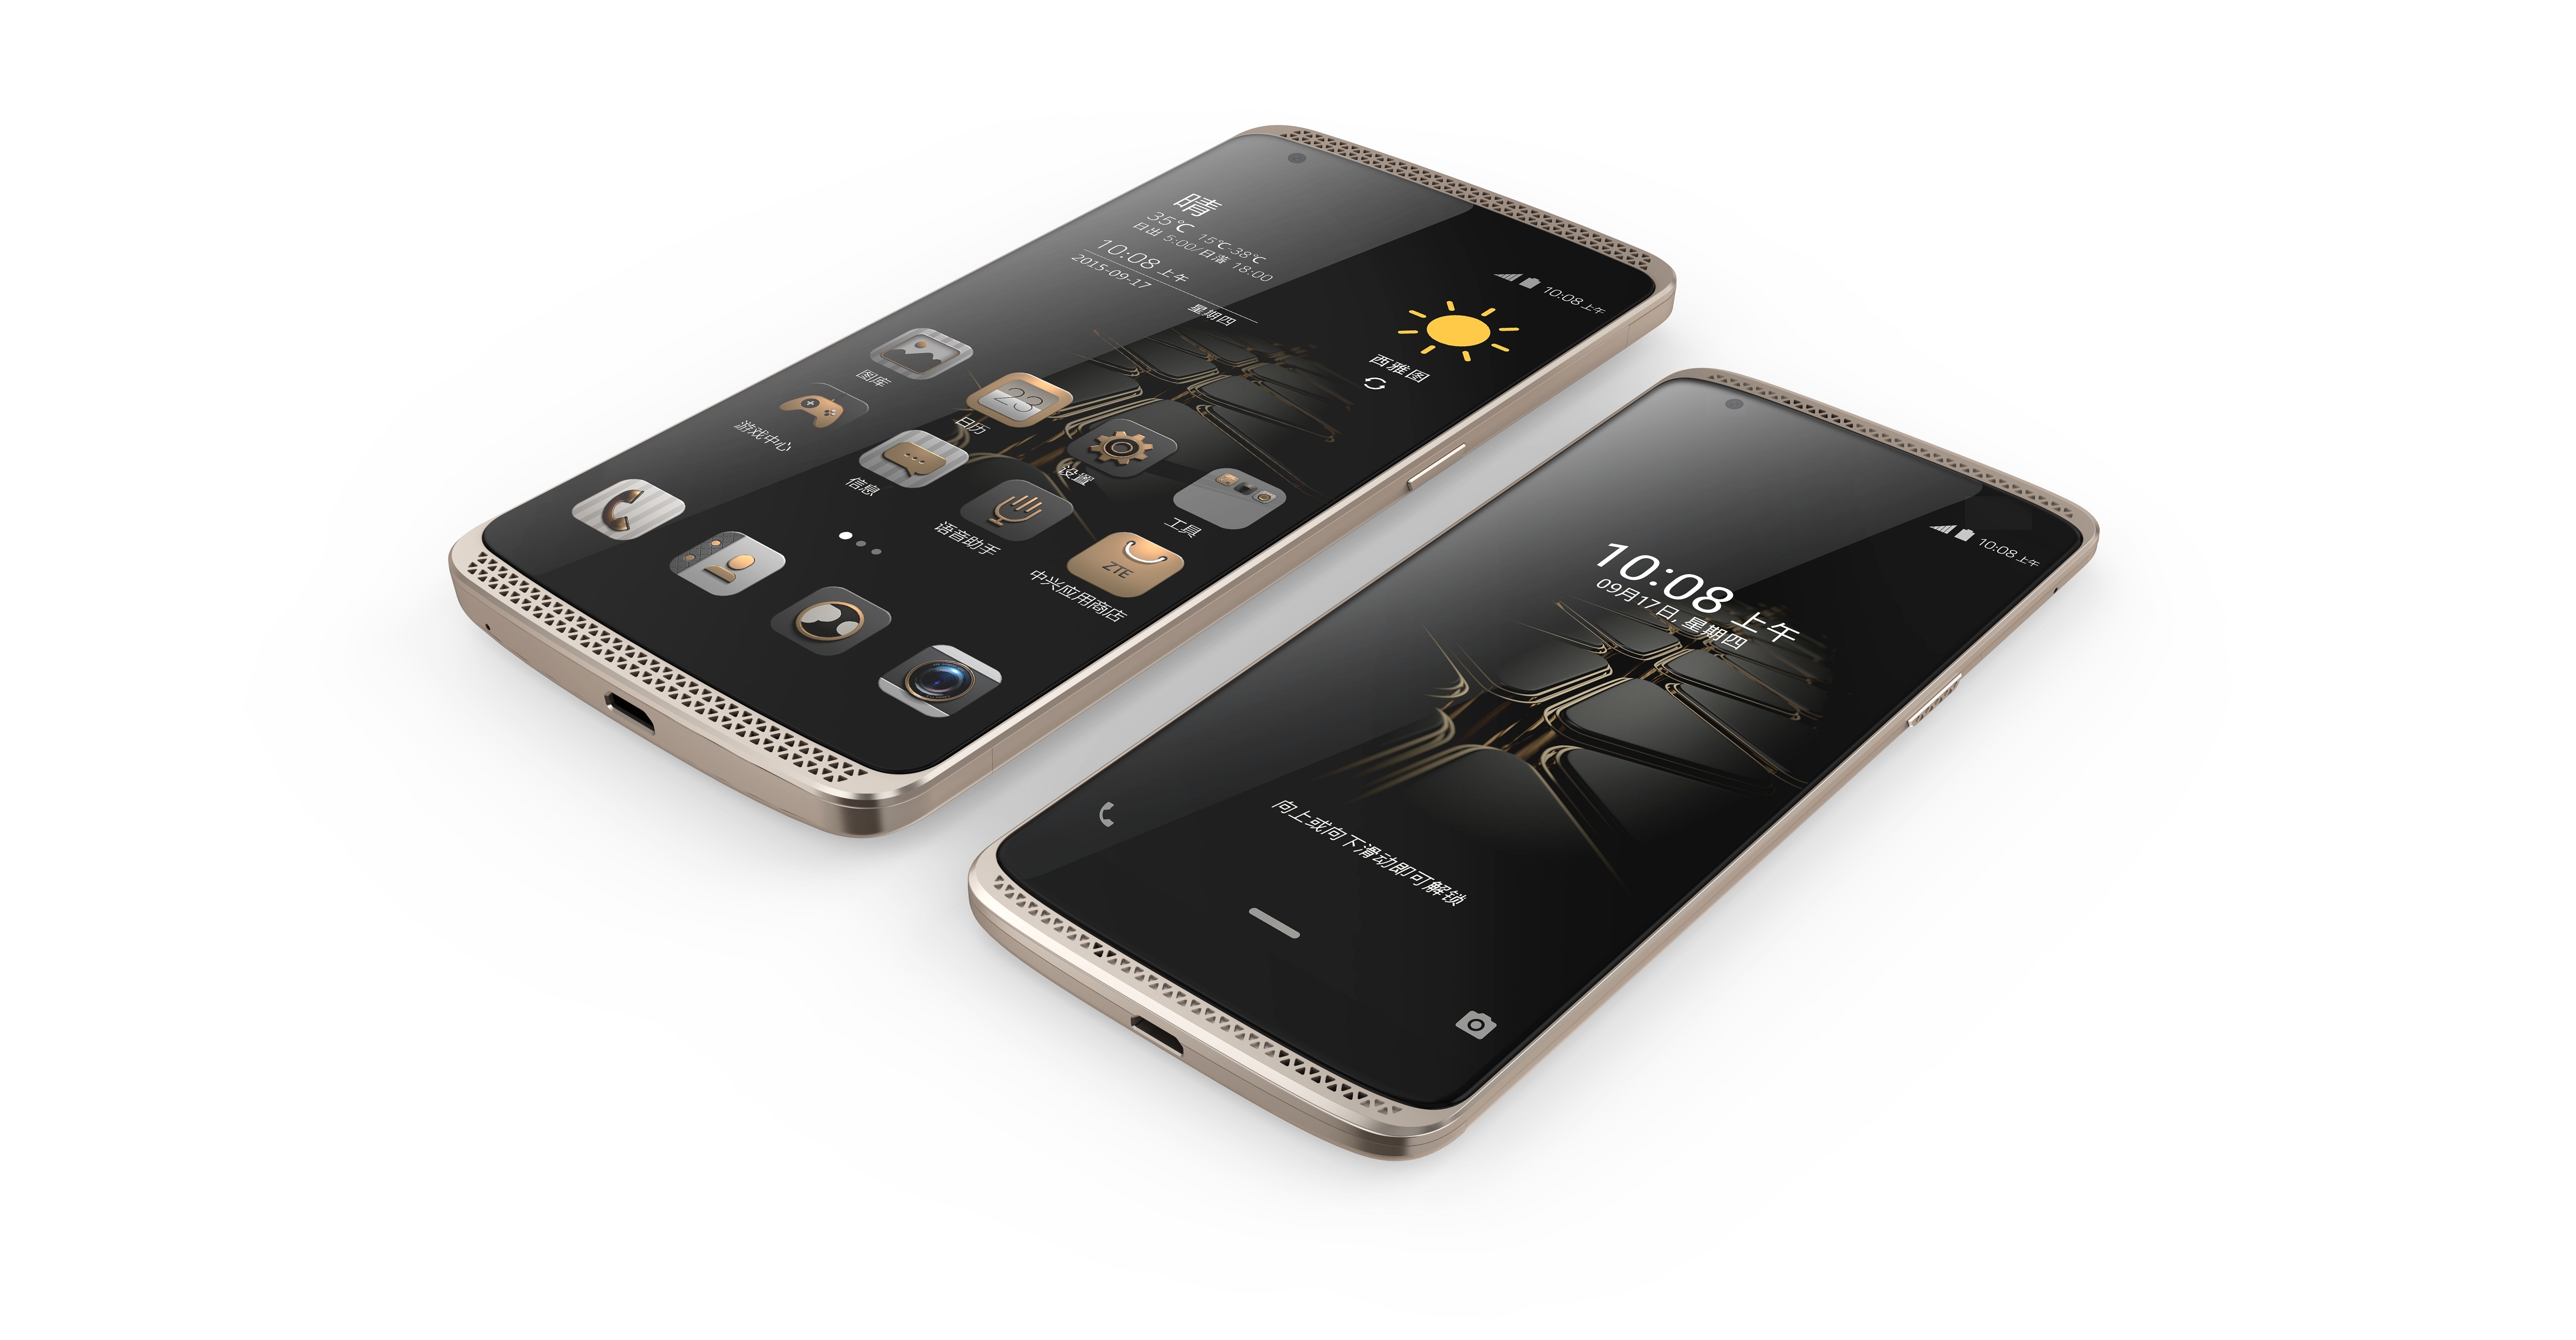 ZTE_AXON_and_the_newly_launched_AXON_mini